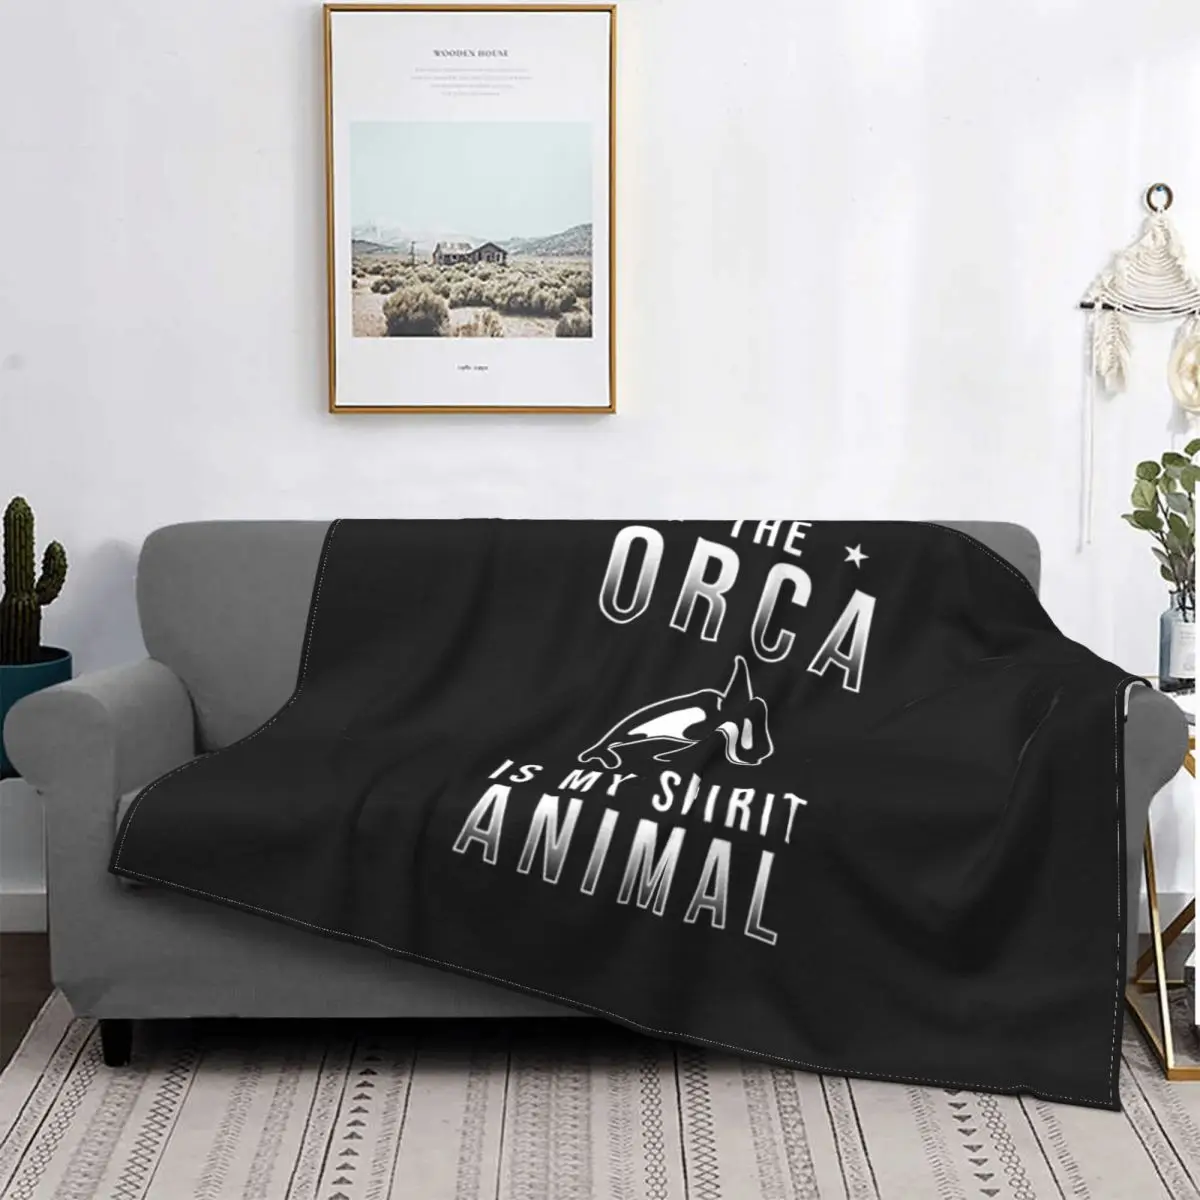 

Orca Killer Whale Spirit Animal Throw Blanket Goth Fleece Flannel Lightweight Blankets for Home Office Couch Bed Sofa All Season